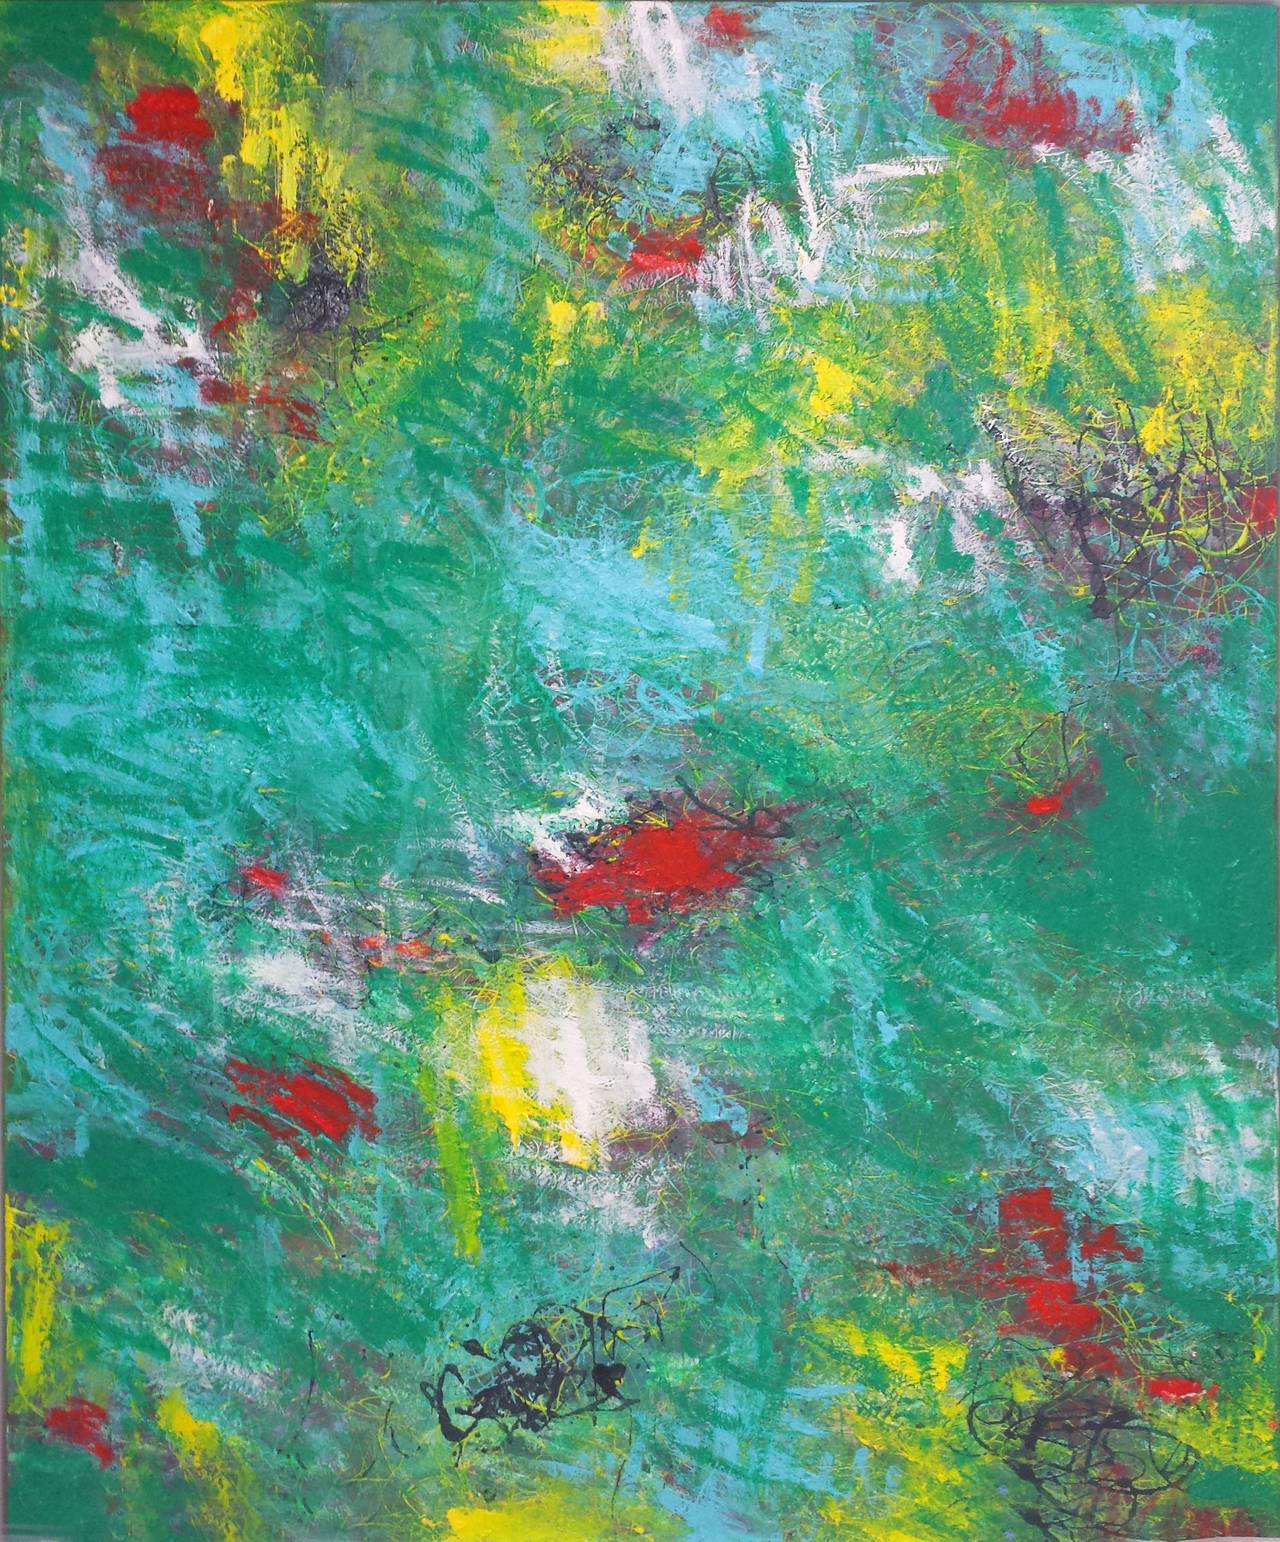 Mirtha Moreno Abstract Painting - Large Oil Painting on Canvas Titled: "Emerald City"